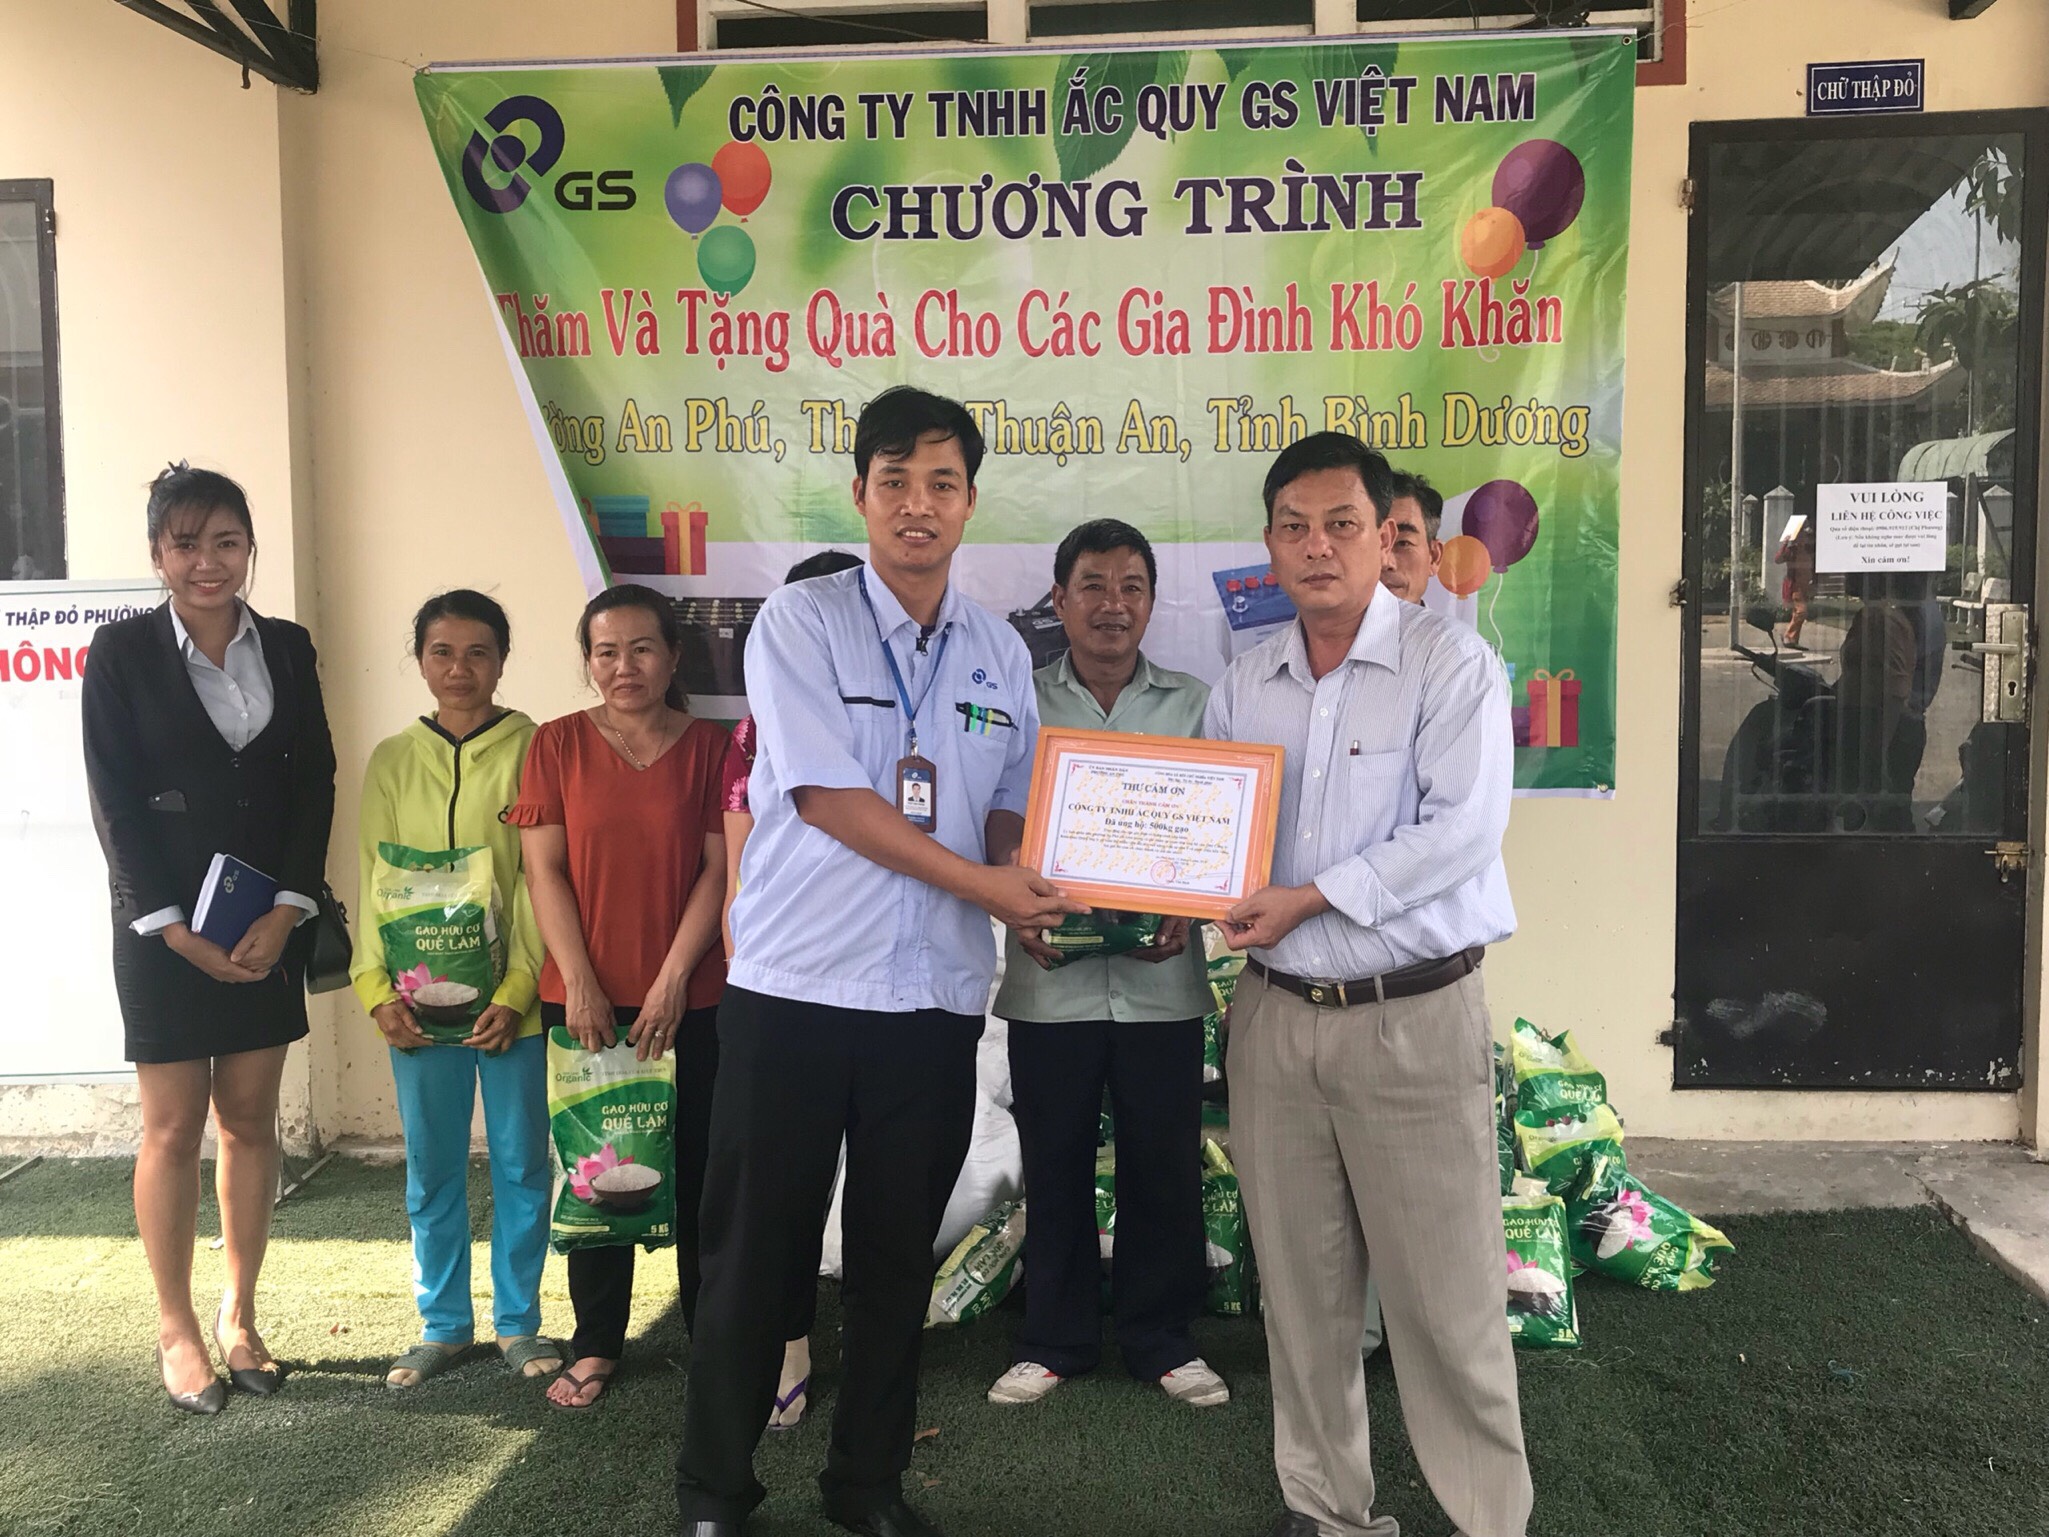 GS BATTERY VIETNAM SUPPORTED DIFFICULT FAMILIES WHO LIVING IN AN PHU WARD - THUAN AN TOWN - BINH DUONG PROVINCE